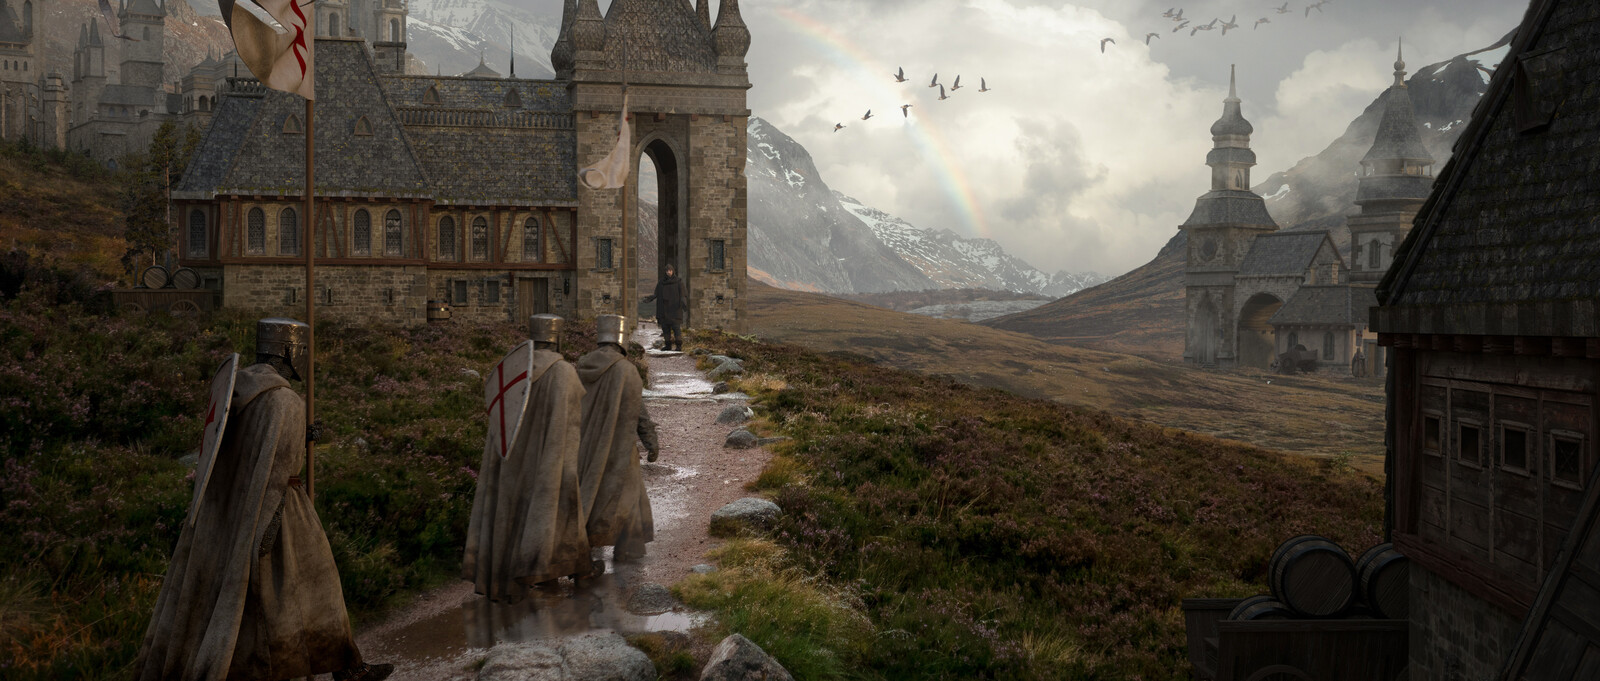 Matte Painting Environment Concept Art- Medieval Castles and Knights  